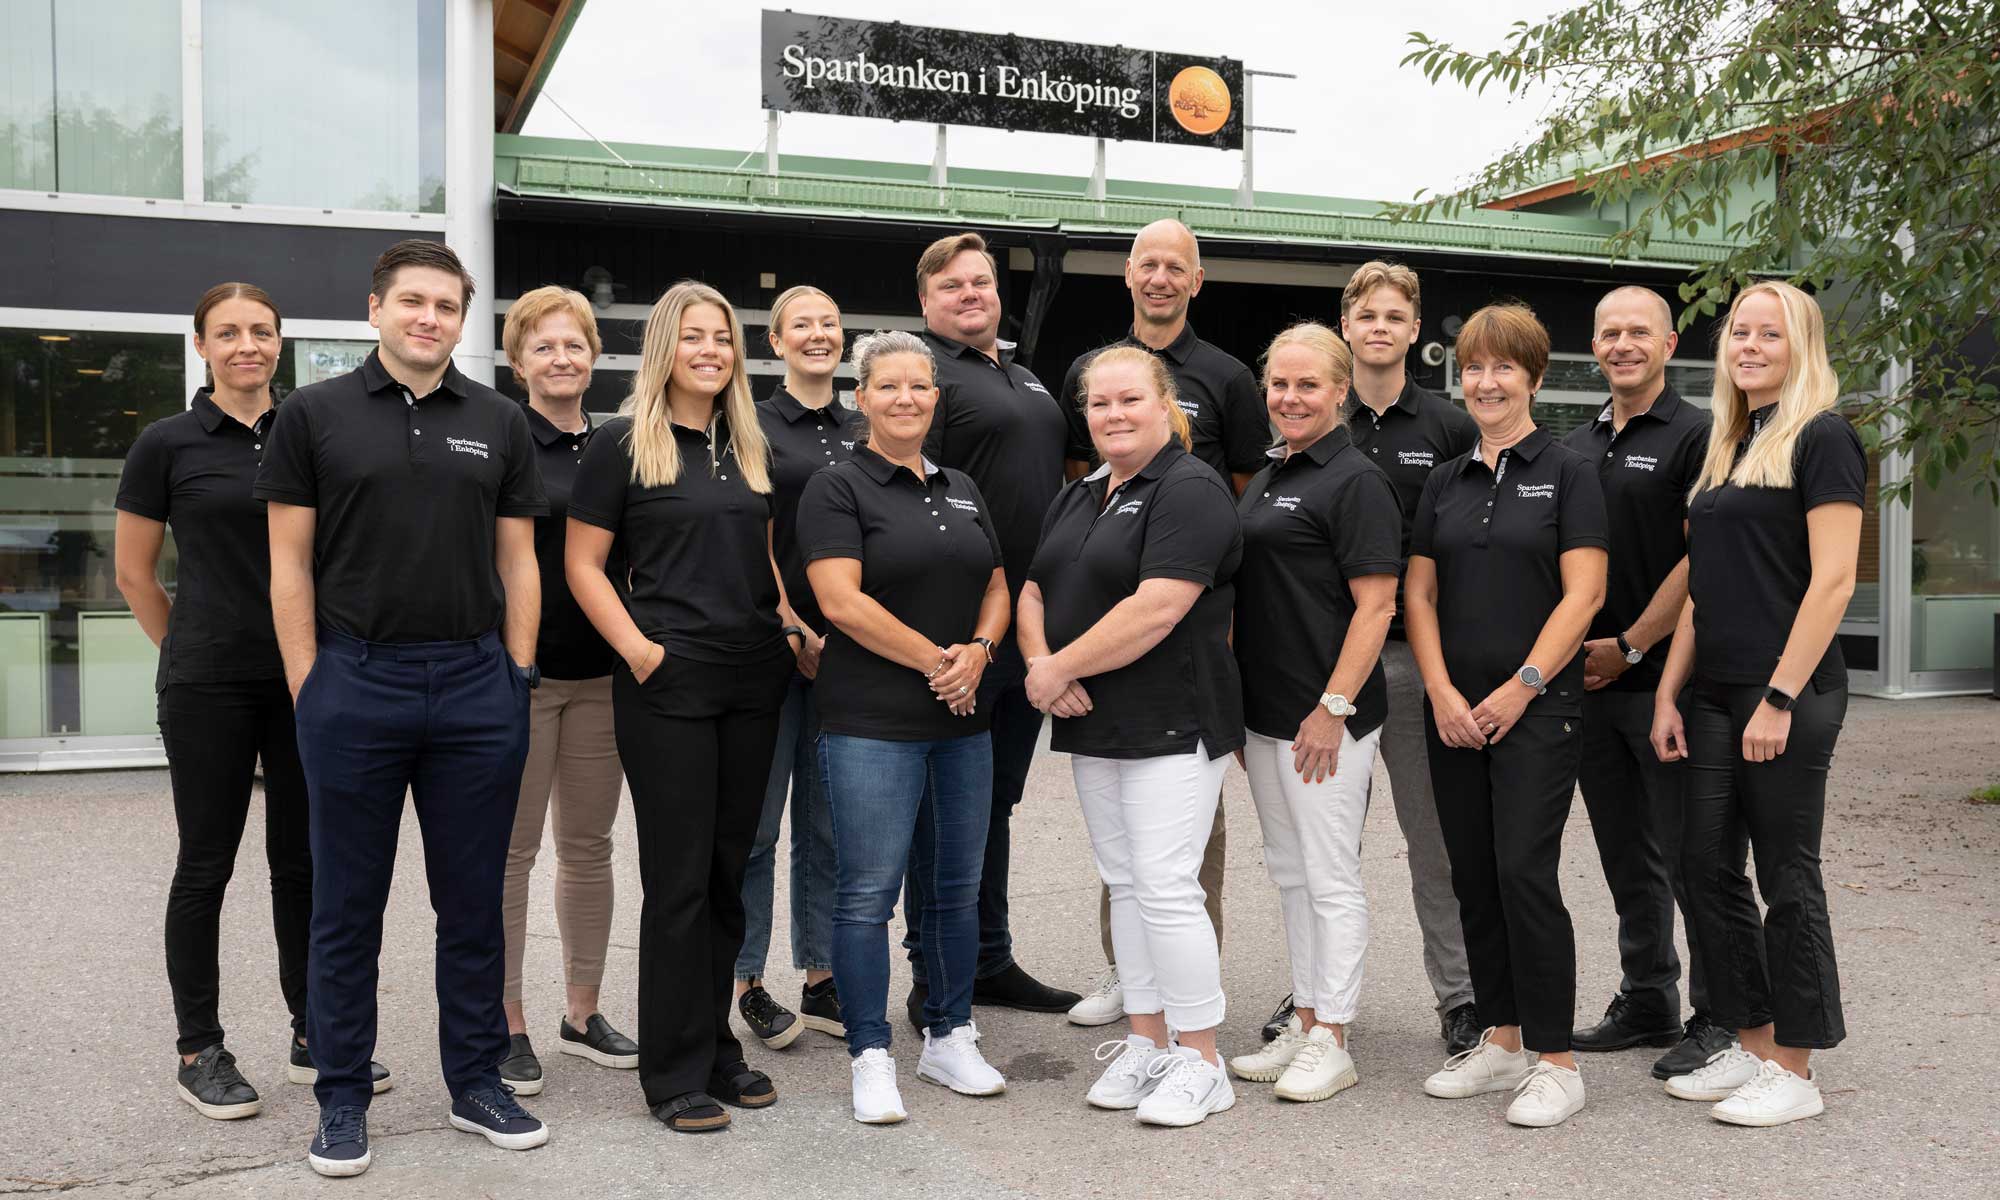 14 people standing in front of the entrance to Sparbanken i Enköping